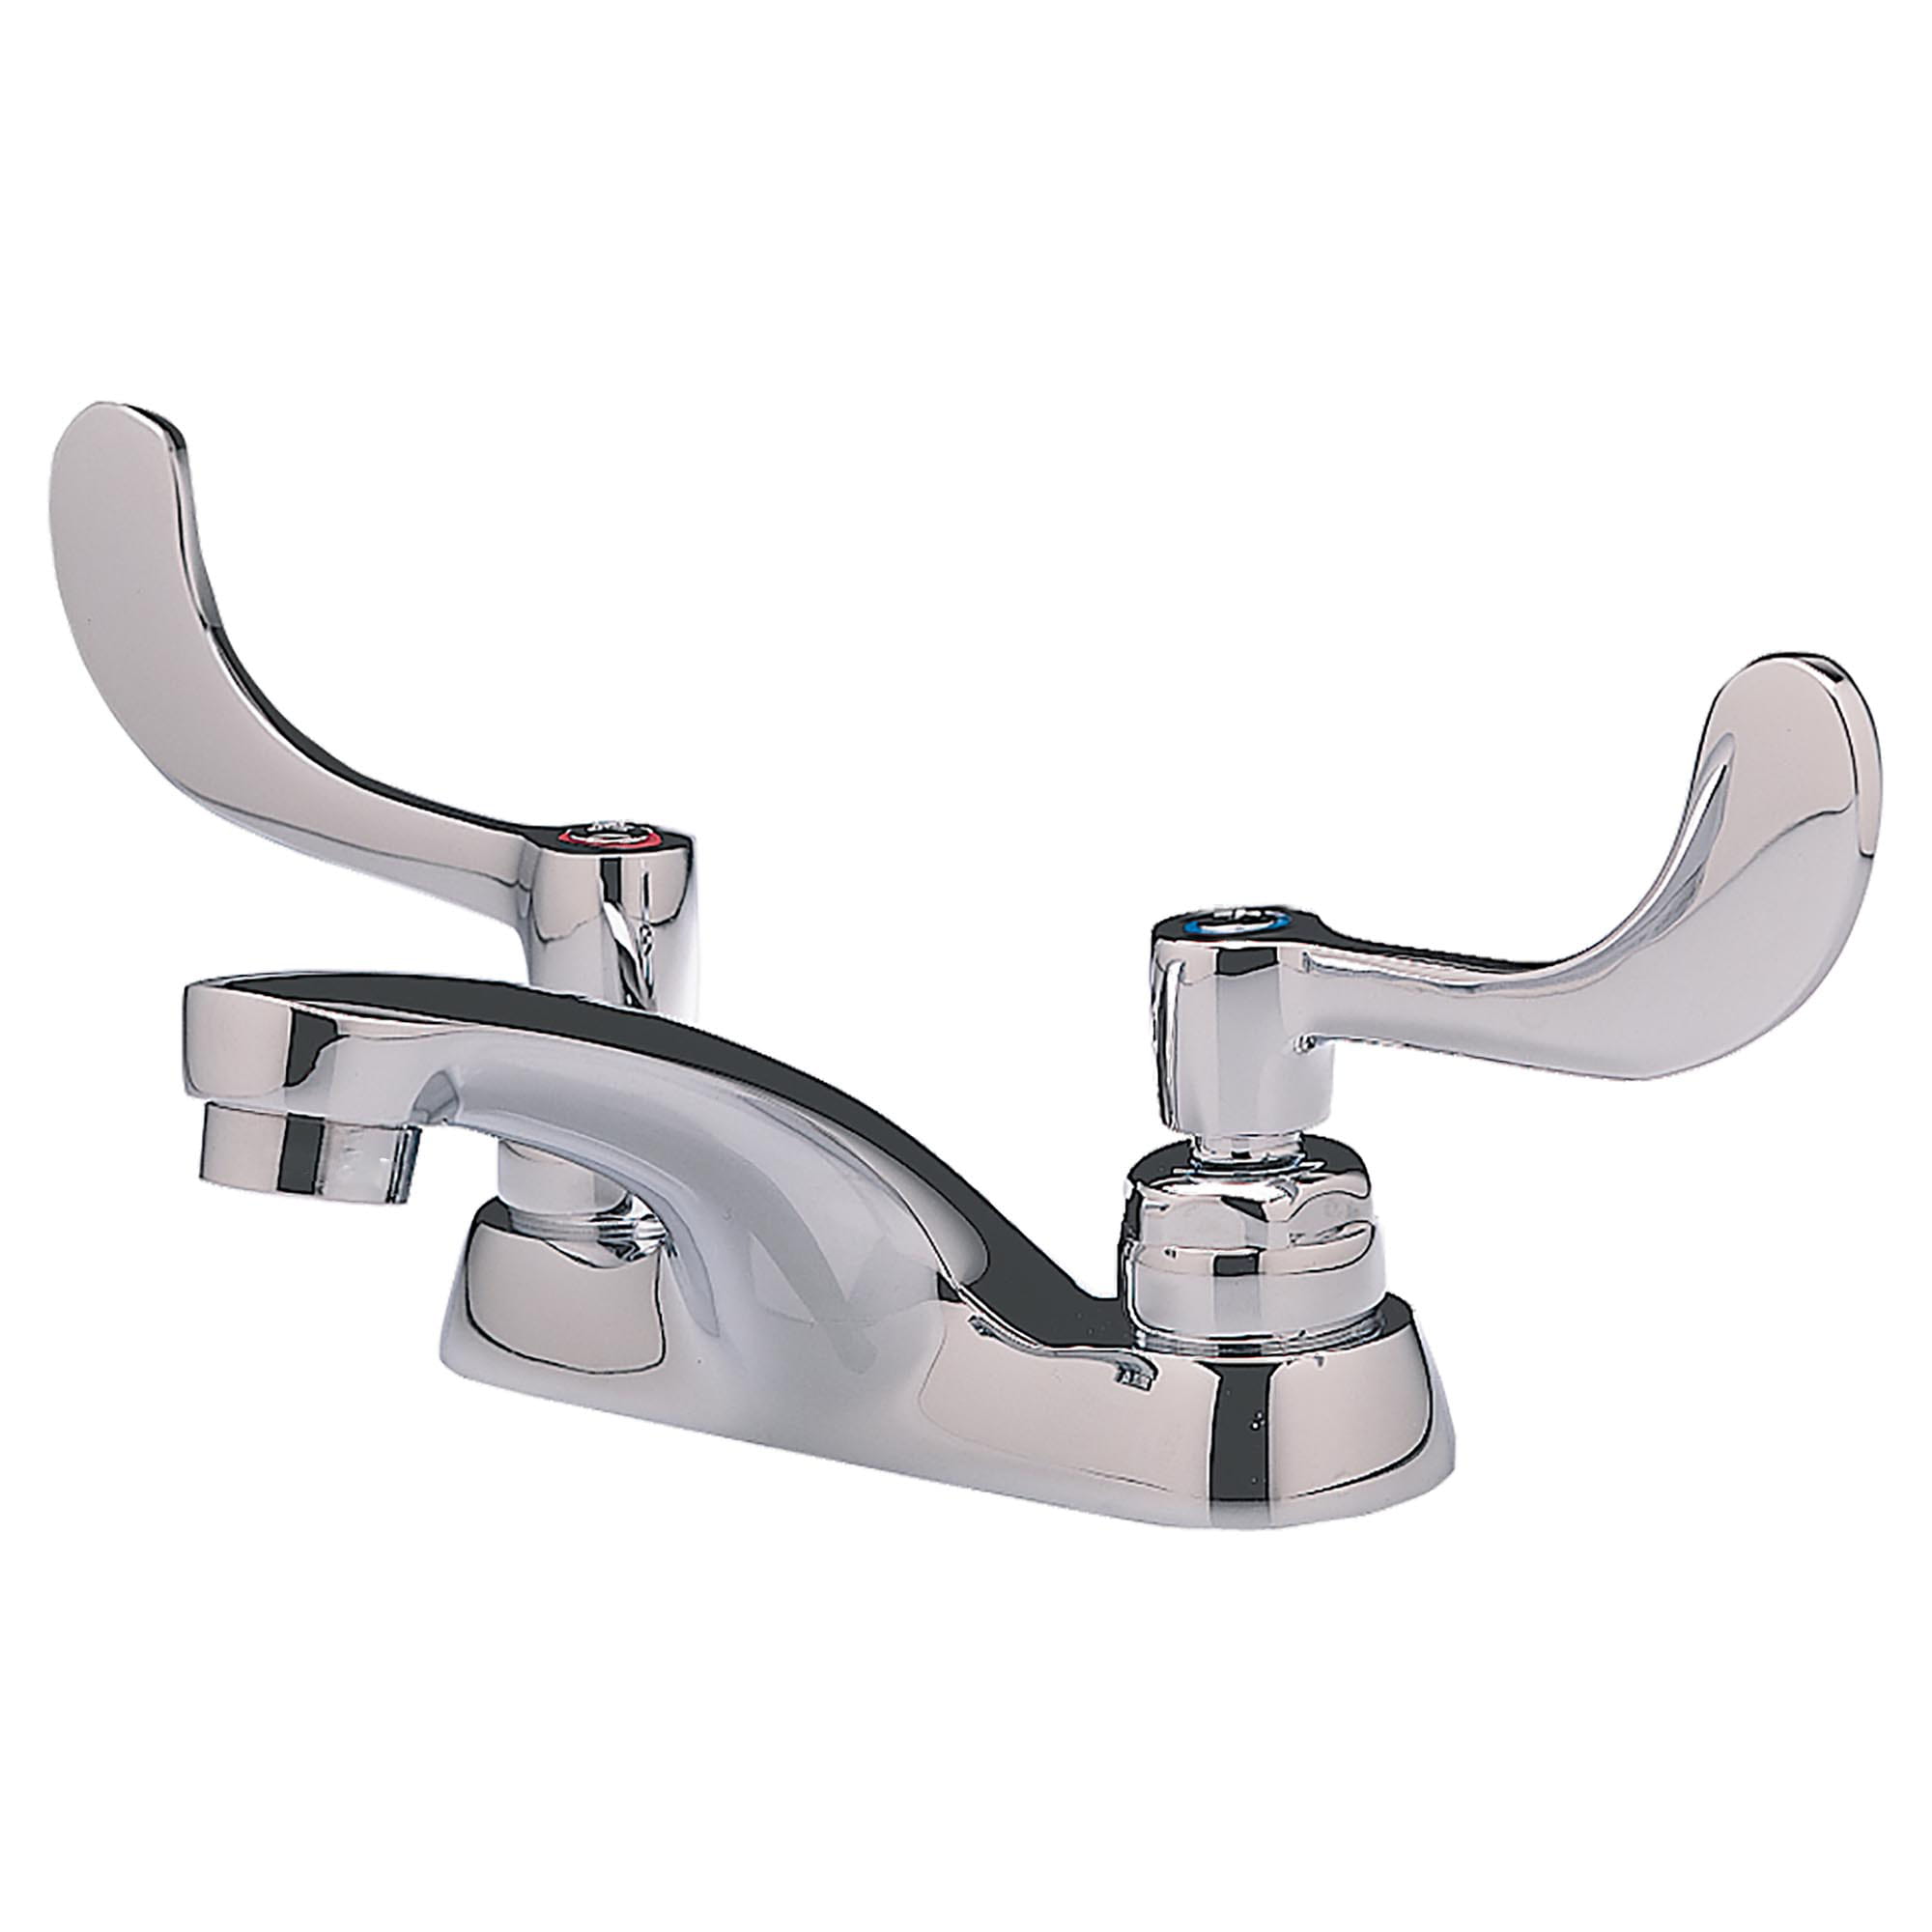 Monterrey® 4-Inch Centerset Cast Faucet With Wrist Blade Handles 0.5 gpm/1.9 Lpm With Grid Drain